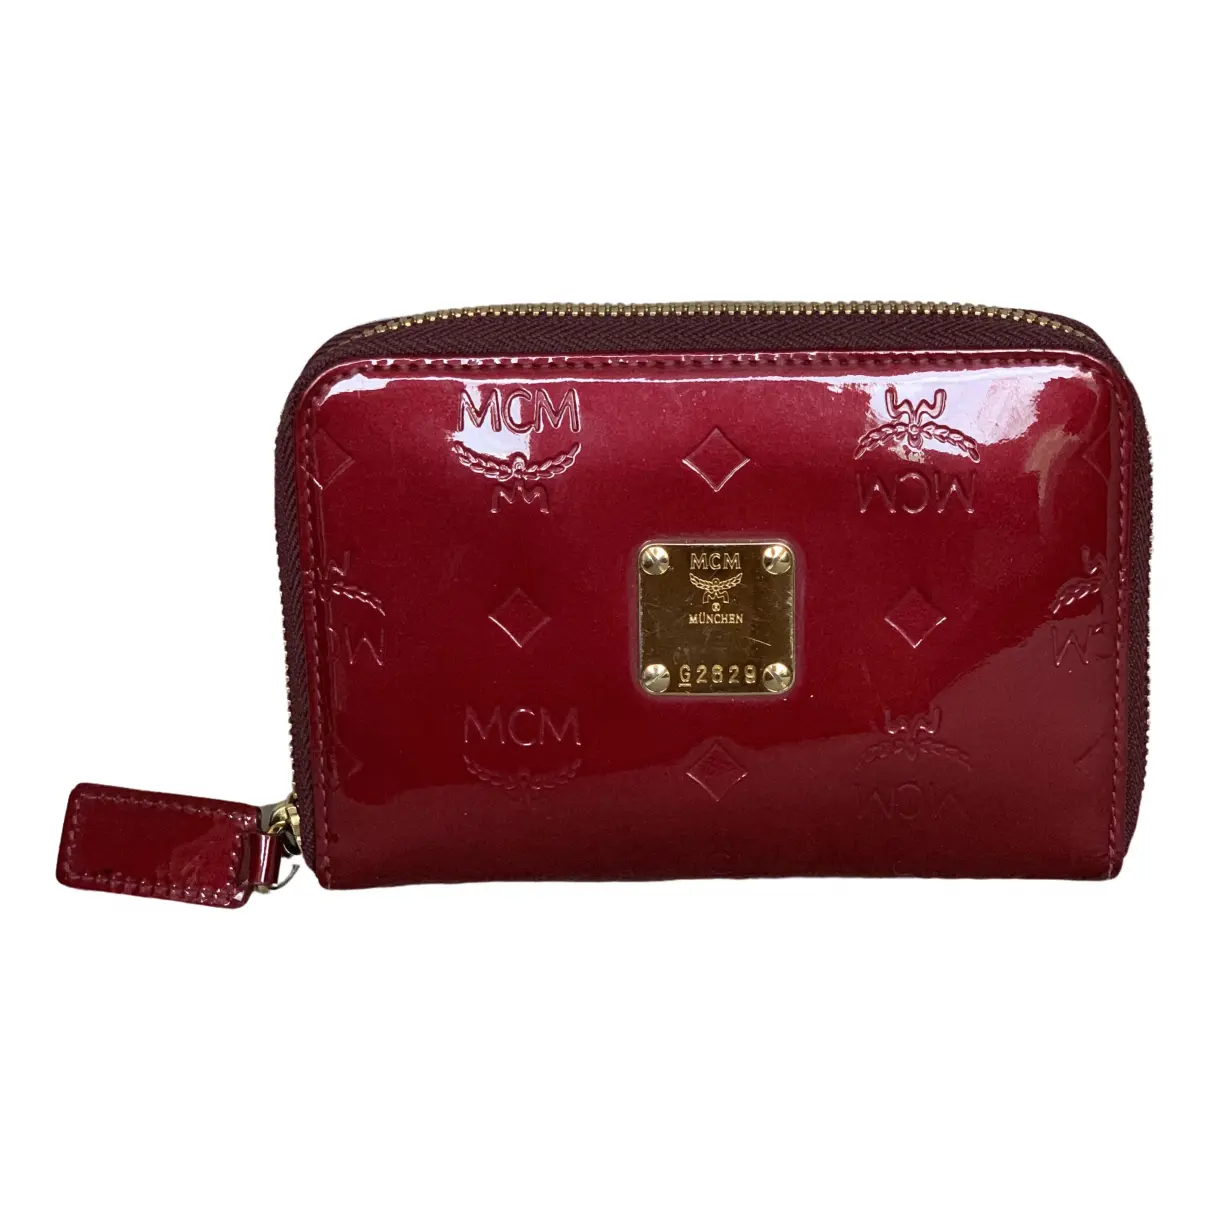 Patent leather wallet MCM